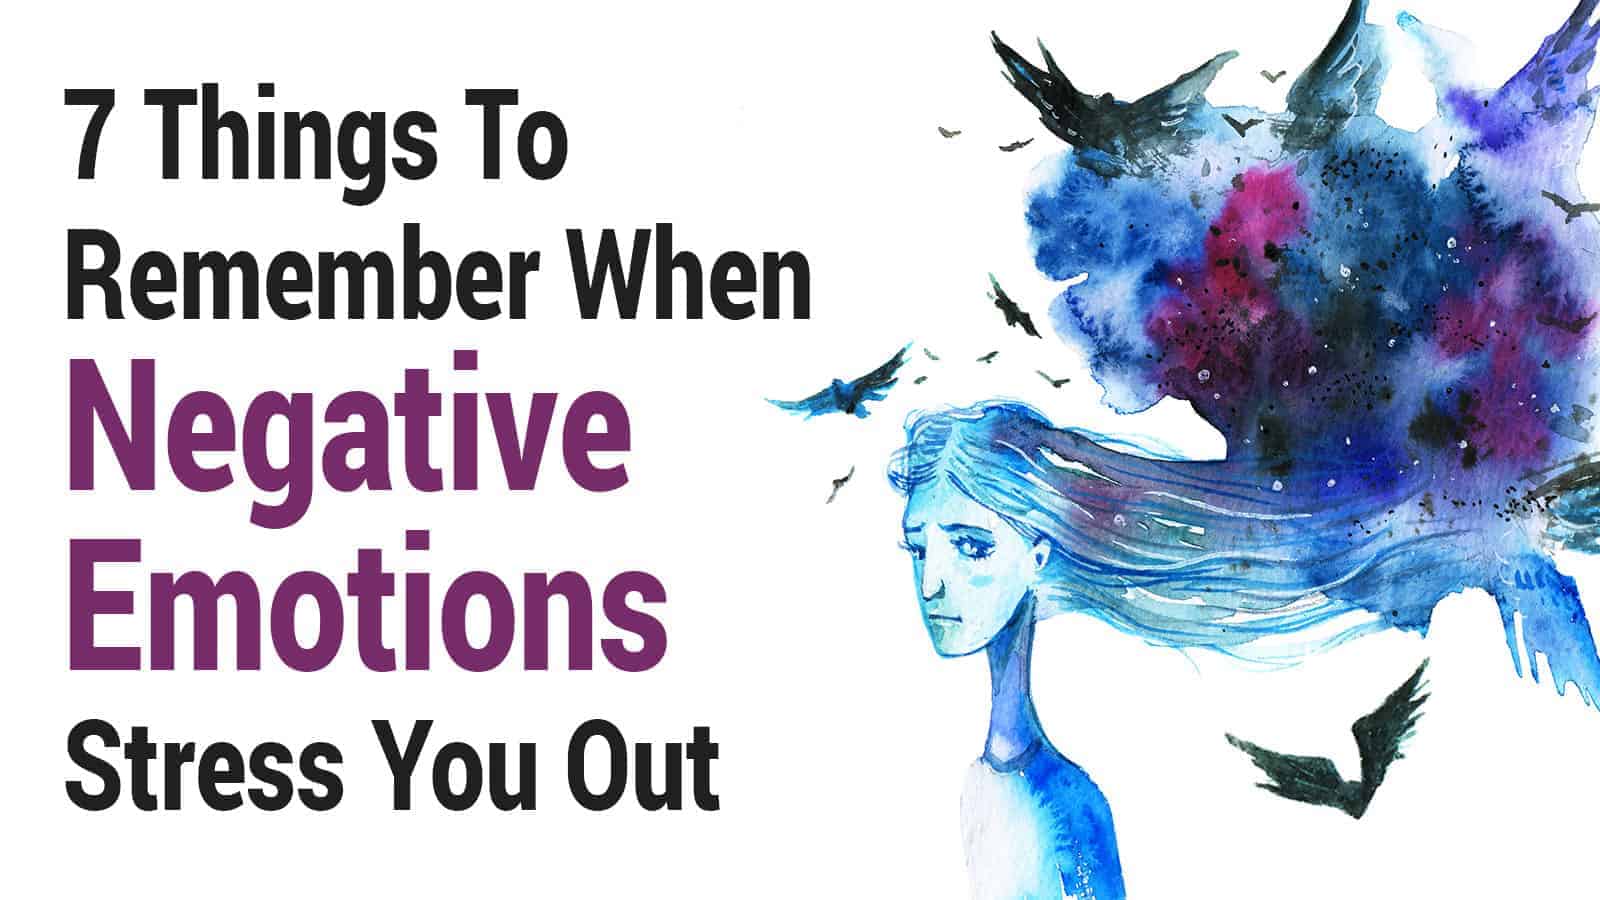 7 Things To Remember When Negative Emotions Stress You Out